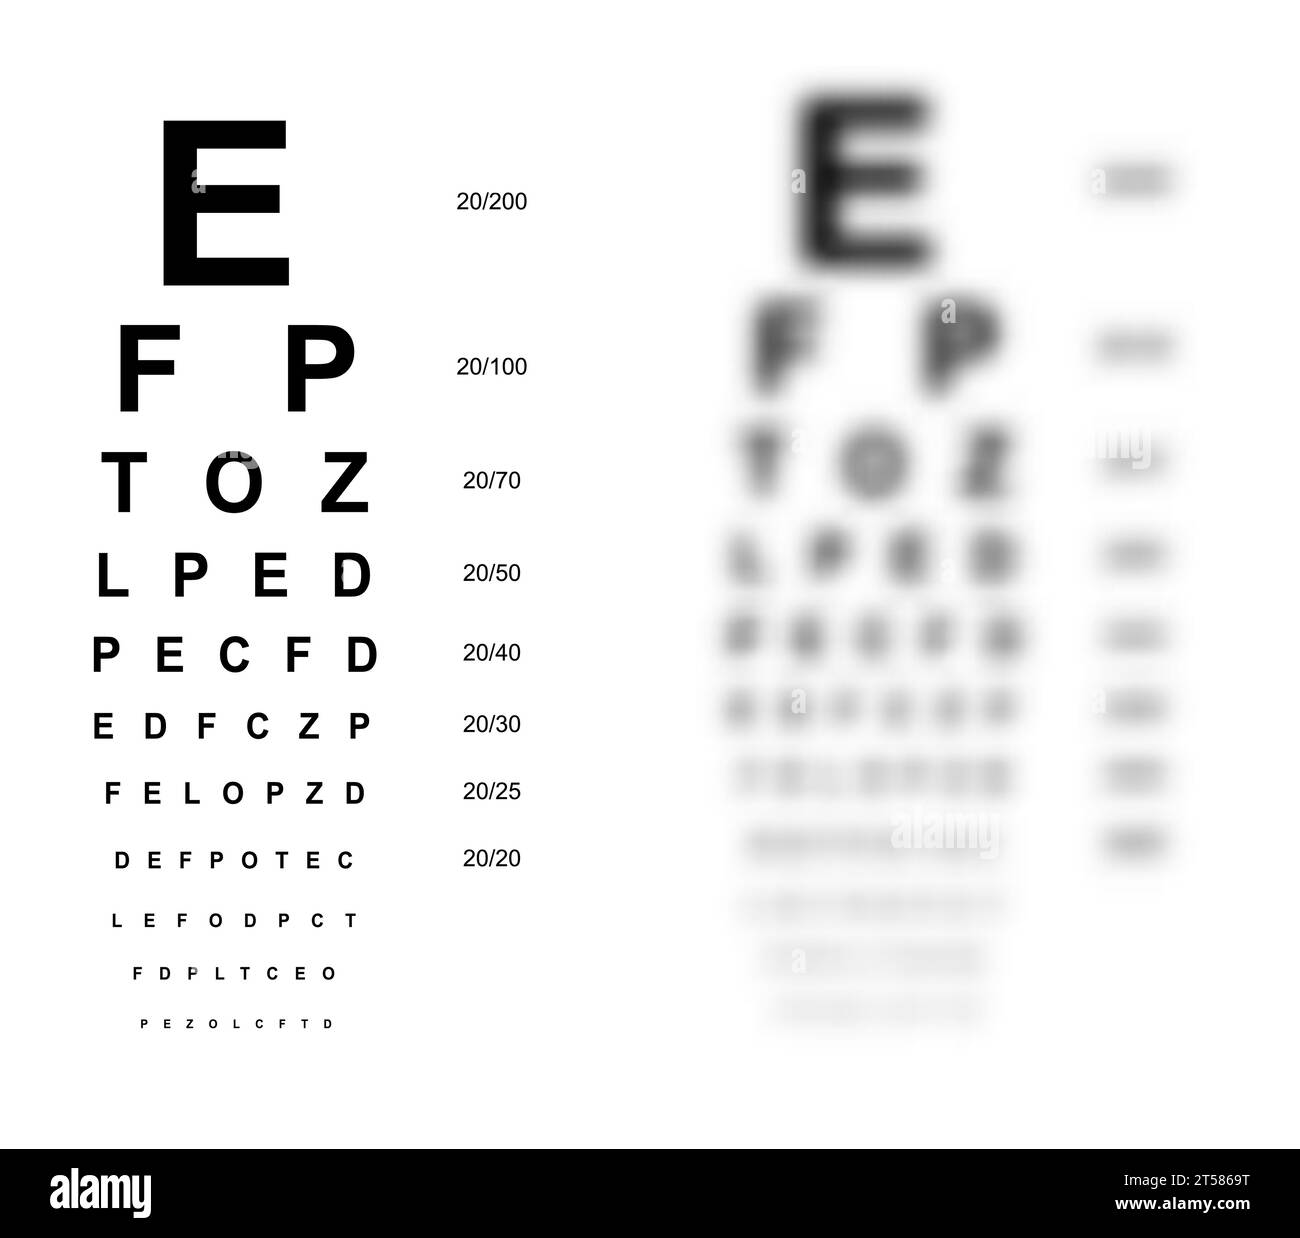 https://c8.alamy.com/comp/2T5869T/snellen-chart-eye-test-medical-illustration-blurred-line-vector-sketch-style-outline-isolated-on-white-background-vision-board-optometrist-ophthalmic-test-for-visual-examination-checking-optical-2T5869T.jpg